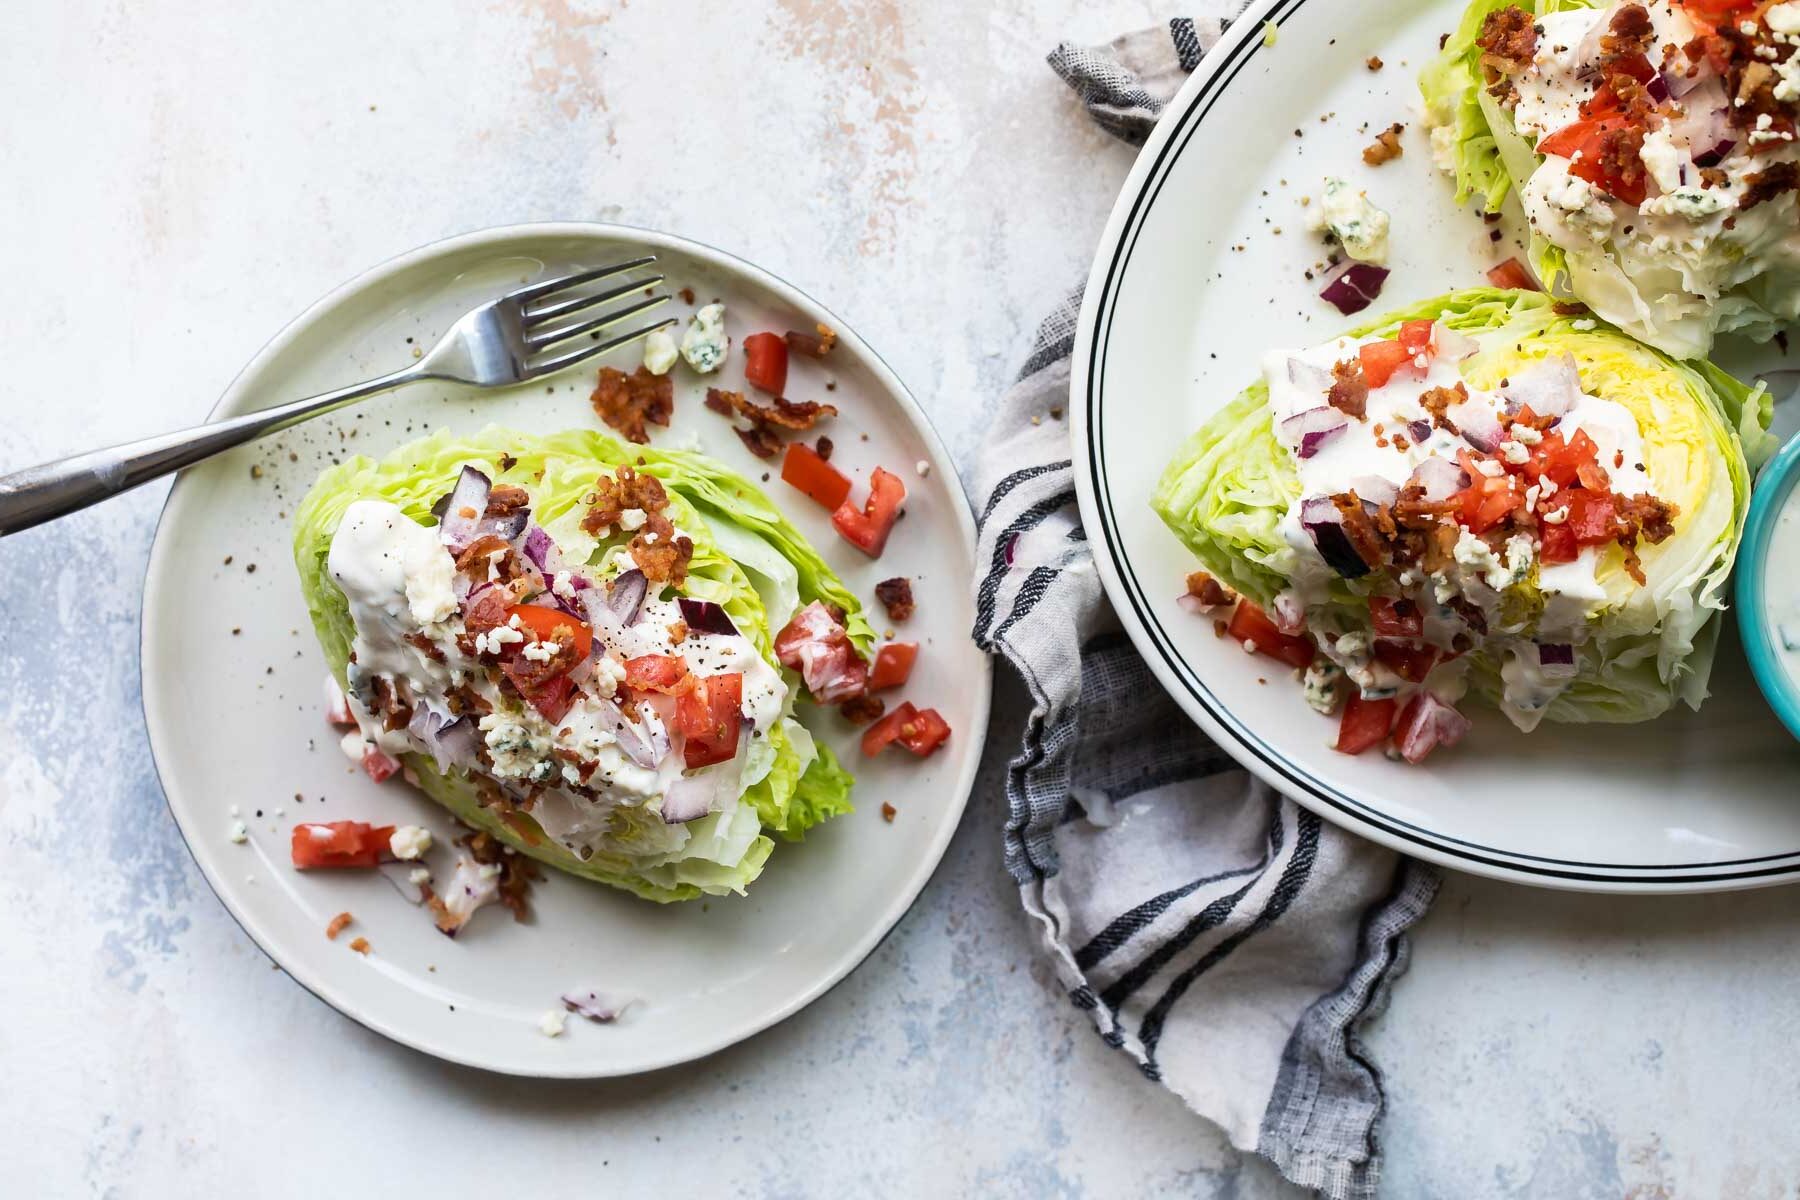 A wedge salad on a plate.